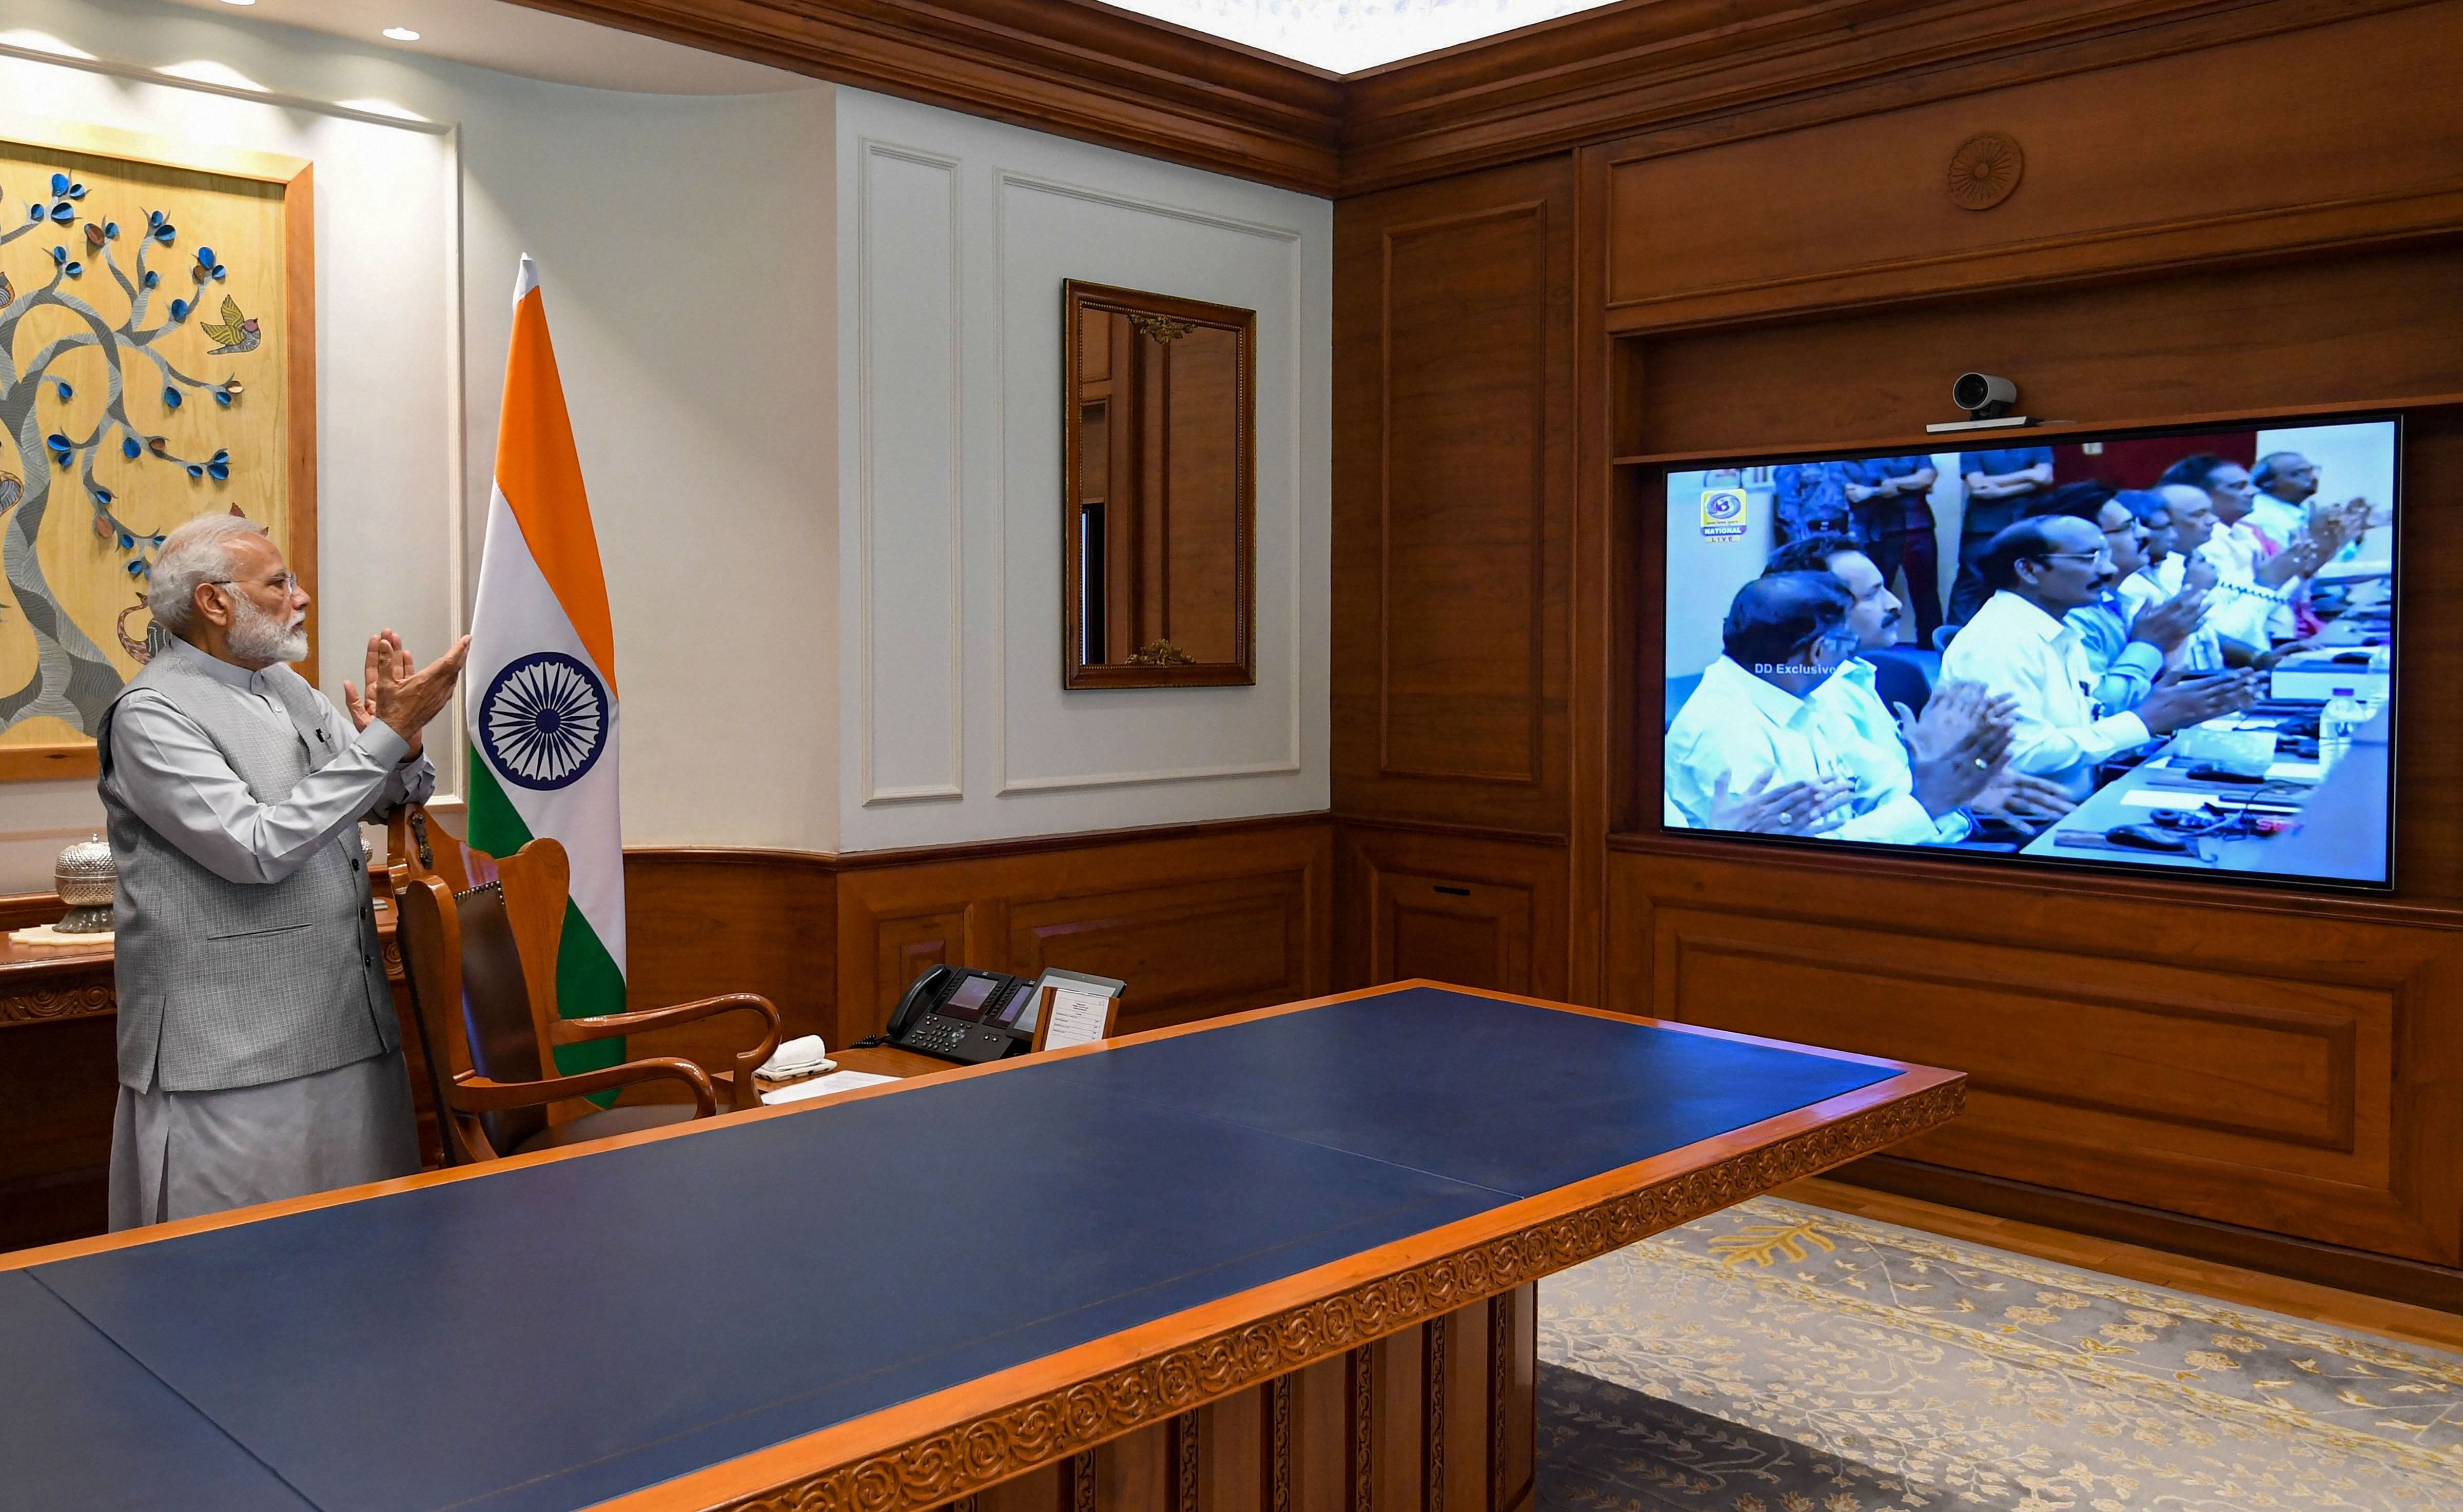 Prime Minister Narendra Modi applauds as he watches on a screen the successful launch of Chandrayaan-2 by GSLV MkIII-M1 vehicle from Satish Dhawan Space Centre of Sriharikota, in New Delhi, Monday, July 22, 2019. Photo/PTI